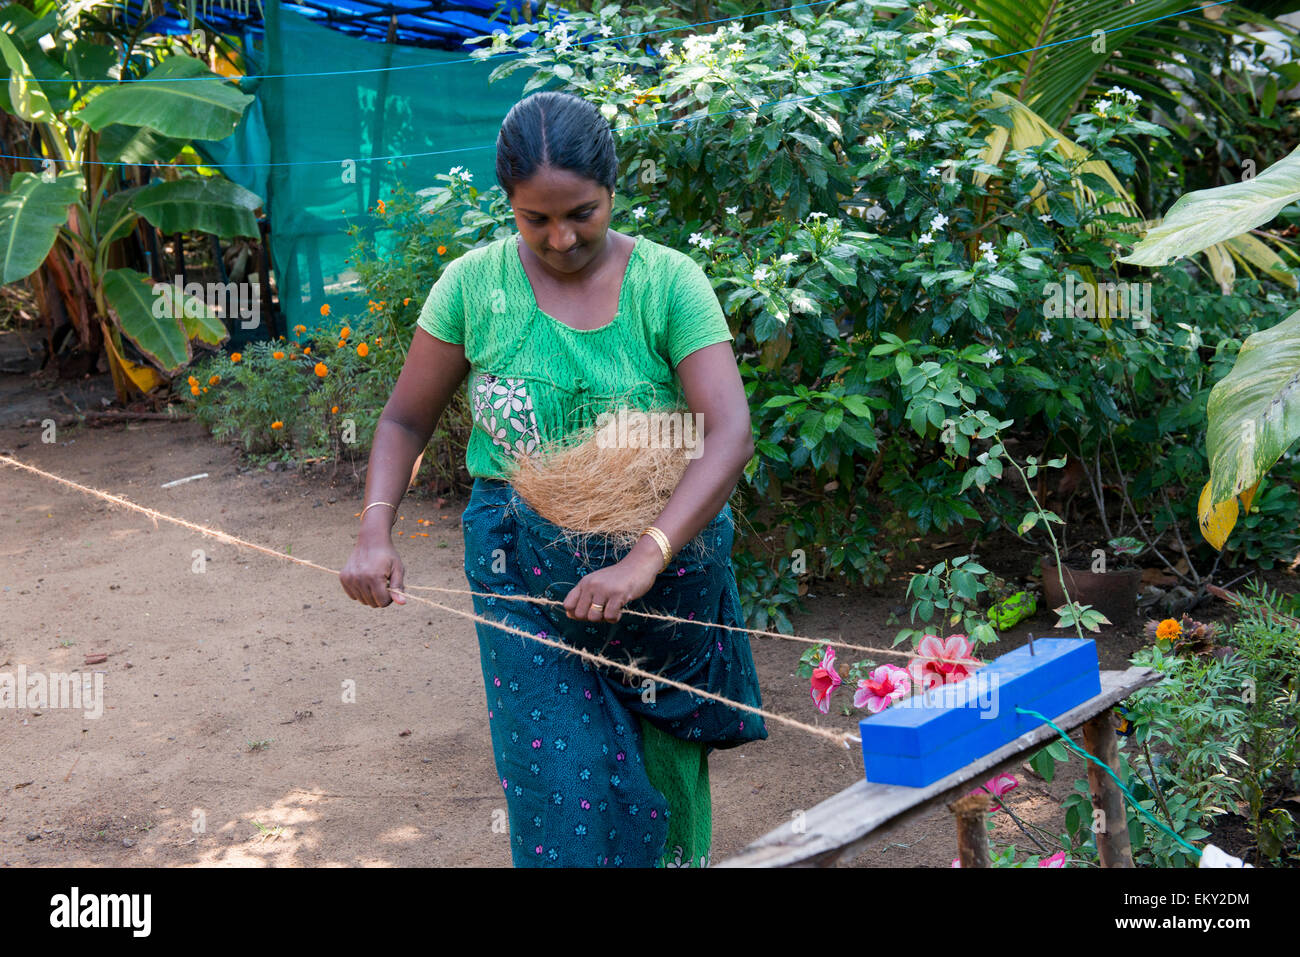 Young Indian woman demonstrating how to make rope from a coconut shell as part of an authentic village experience, Kerala India Stock Photo